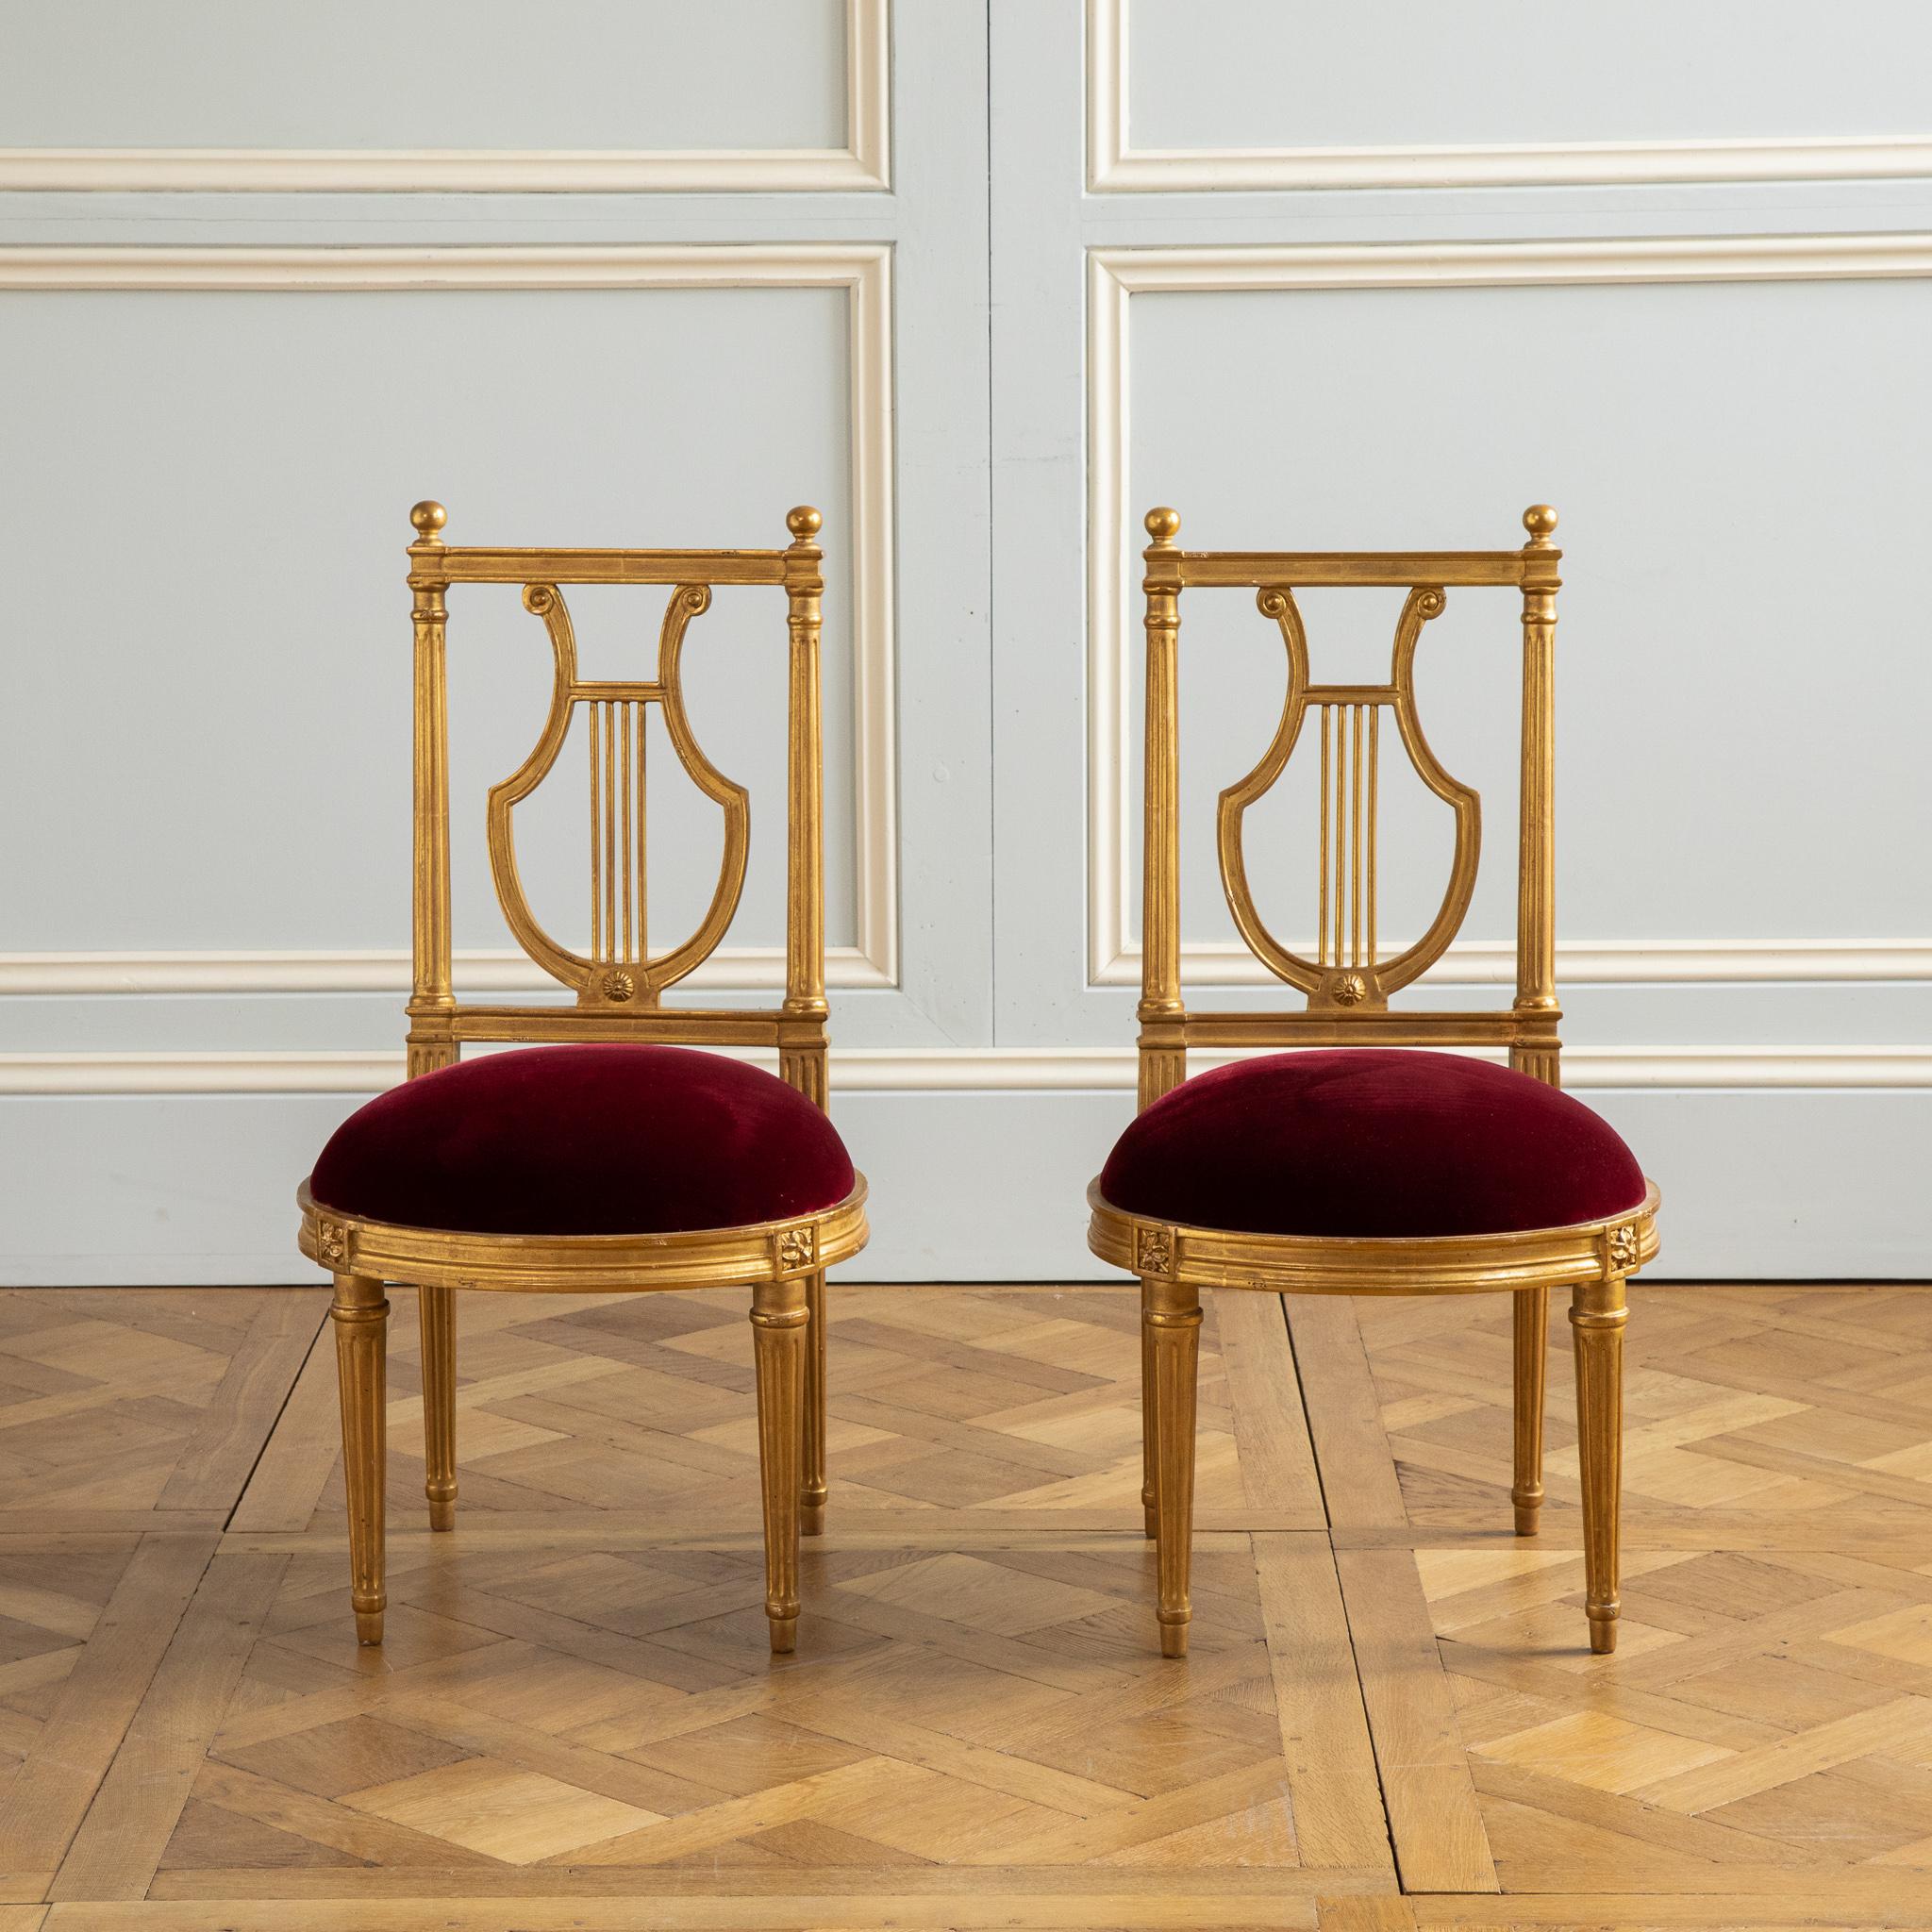 Louis XVI Gilded Lyre Chairs with Deep Red Velvet Inspired by Jacob For Sale 1